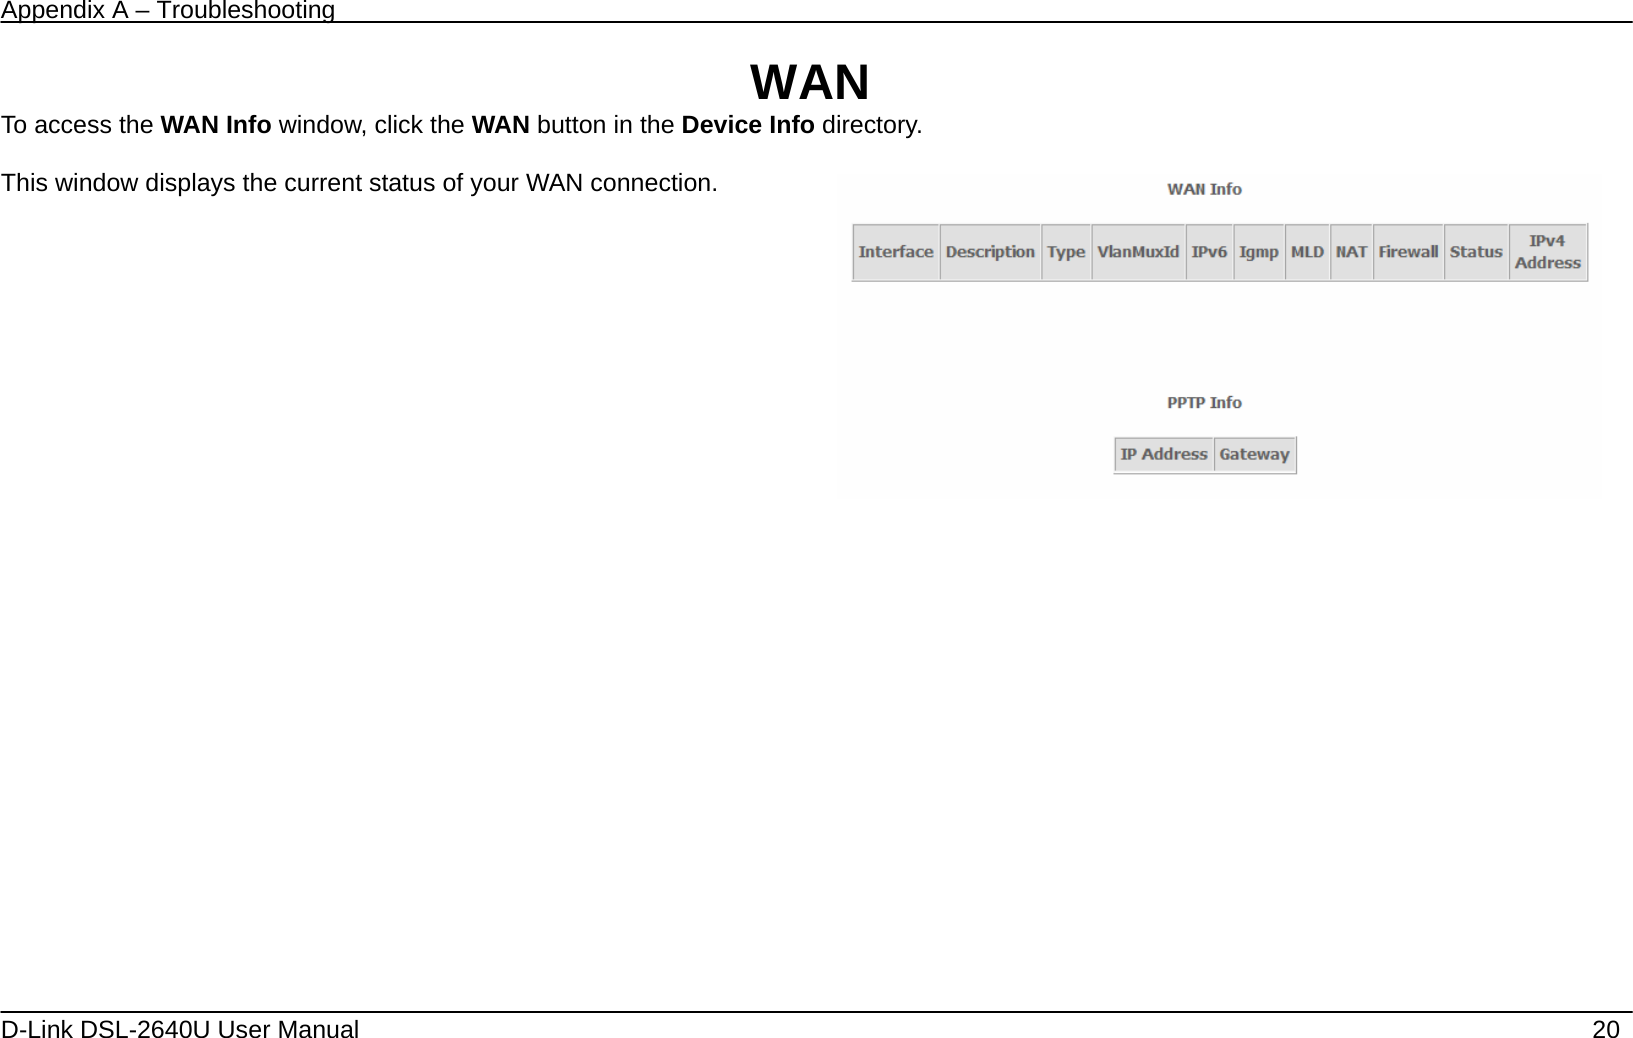 Appendix A – Troubleshooting   D-Link DSL-2640U User Manual    20 WAN To access the WAN Info window, click the WAN button in the Device Info directory.  This window displays the current status of your WAN connection.  